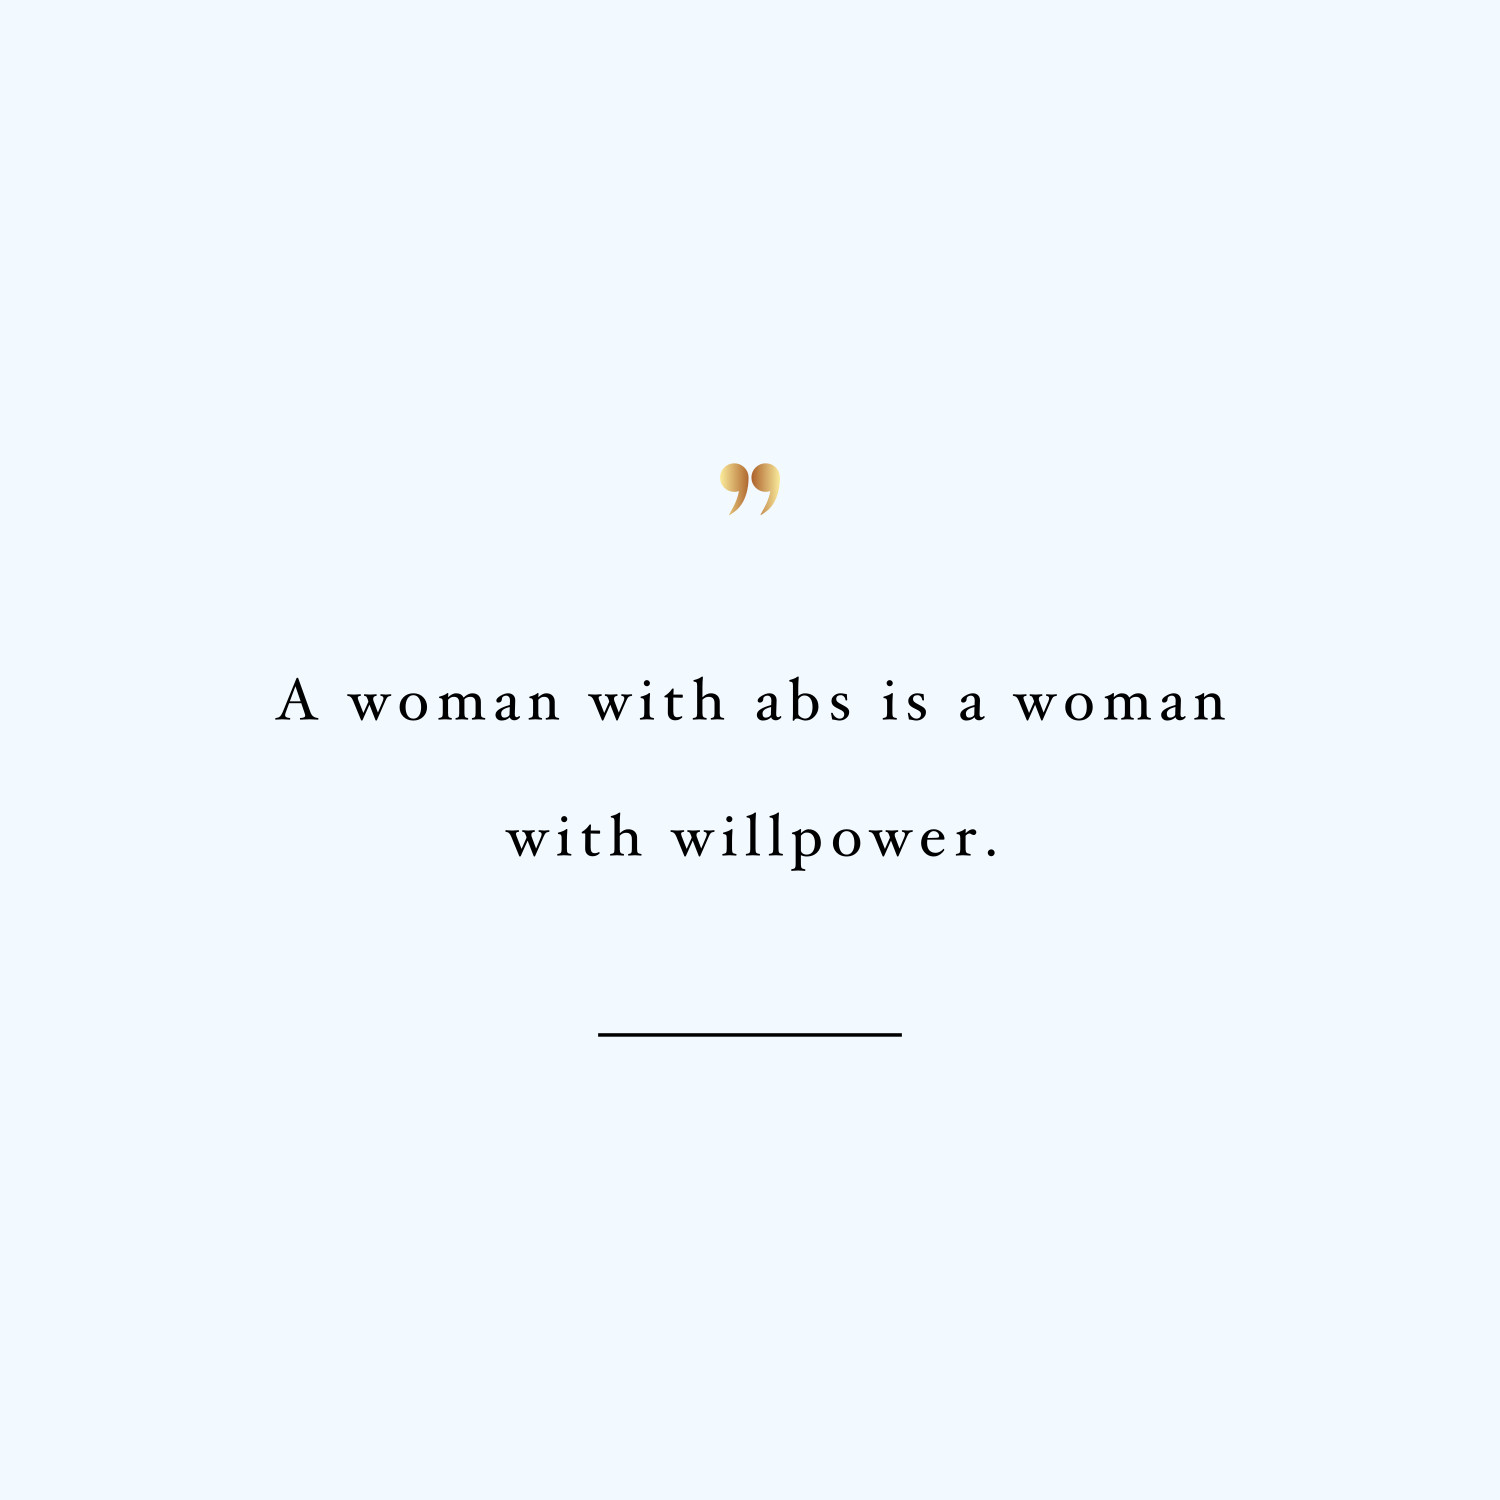 Be a woman with willpower! Browse our collection of inspirational health and fitness quotes and get instant exercise and weight loss motivation. Transform positive thoughts into positive actions and get fit, healthy and happy! https://www.spotebi.com/workout-motivation/be-a-woman-with-willpower-exercise-and-weight-loss-motivation/